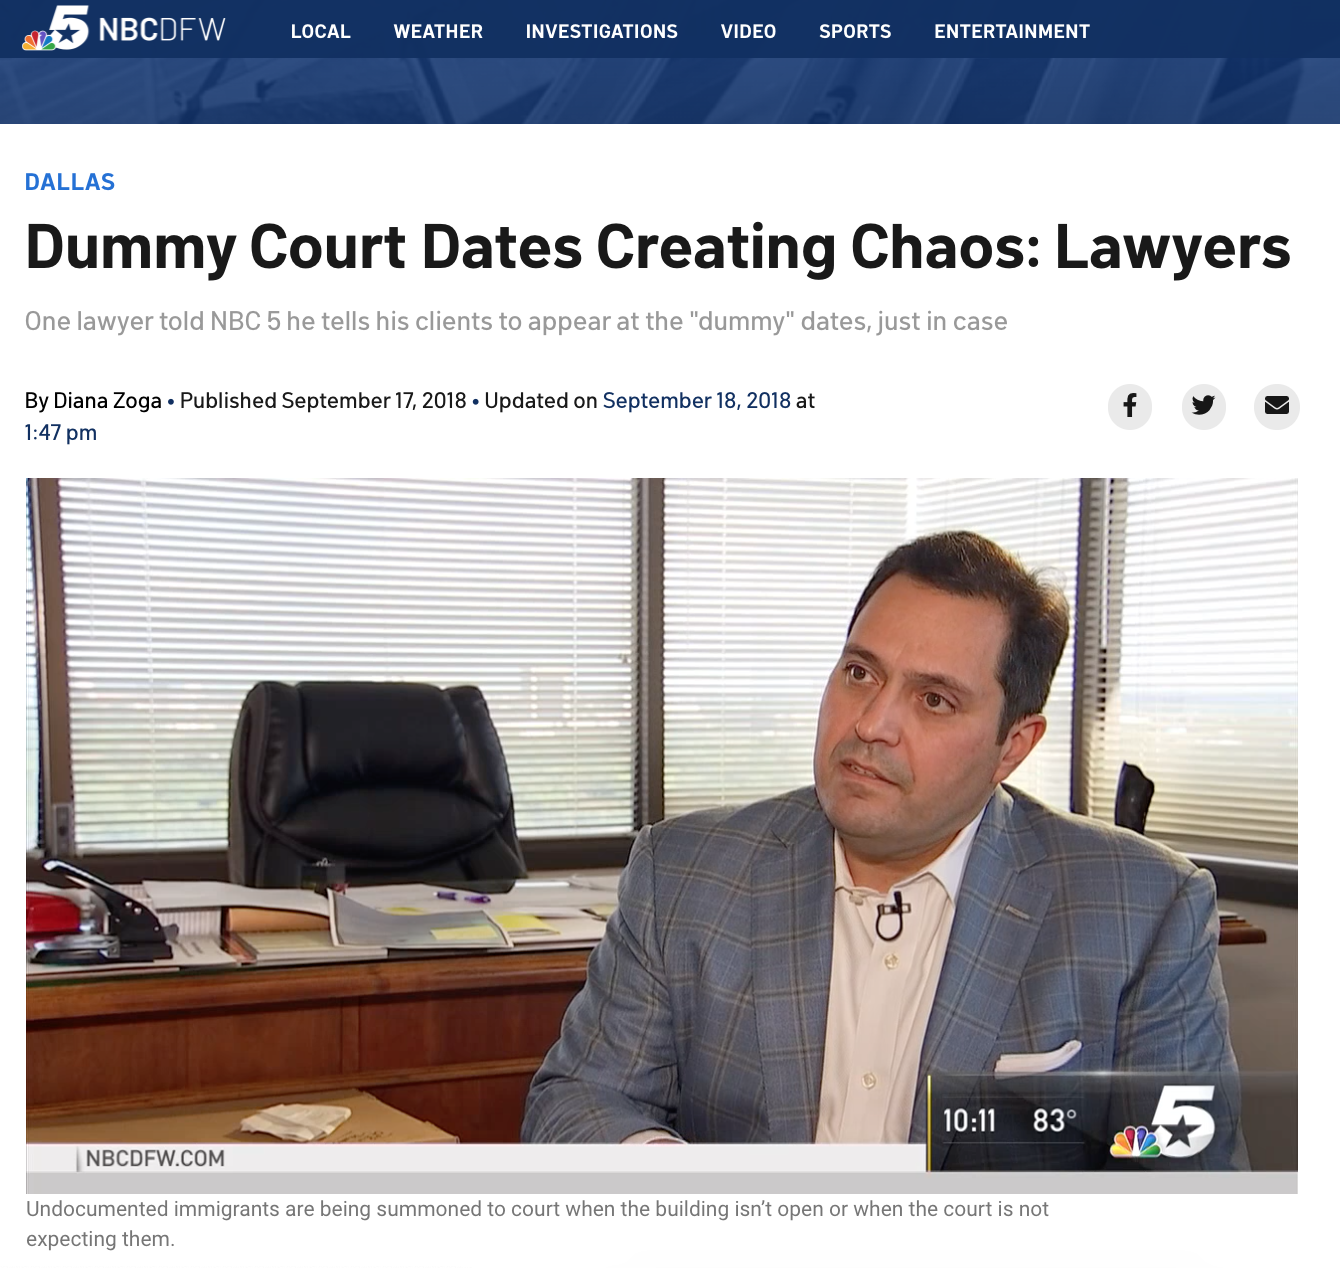 Dummy Court Dates Creating Chaos: Lawyers